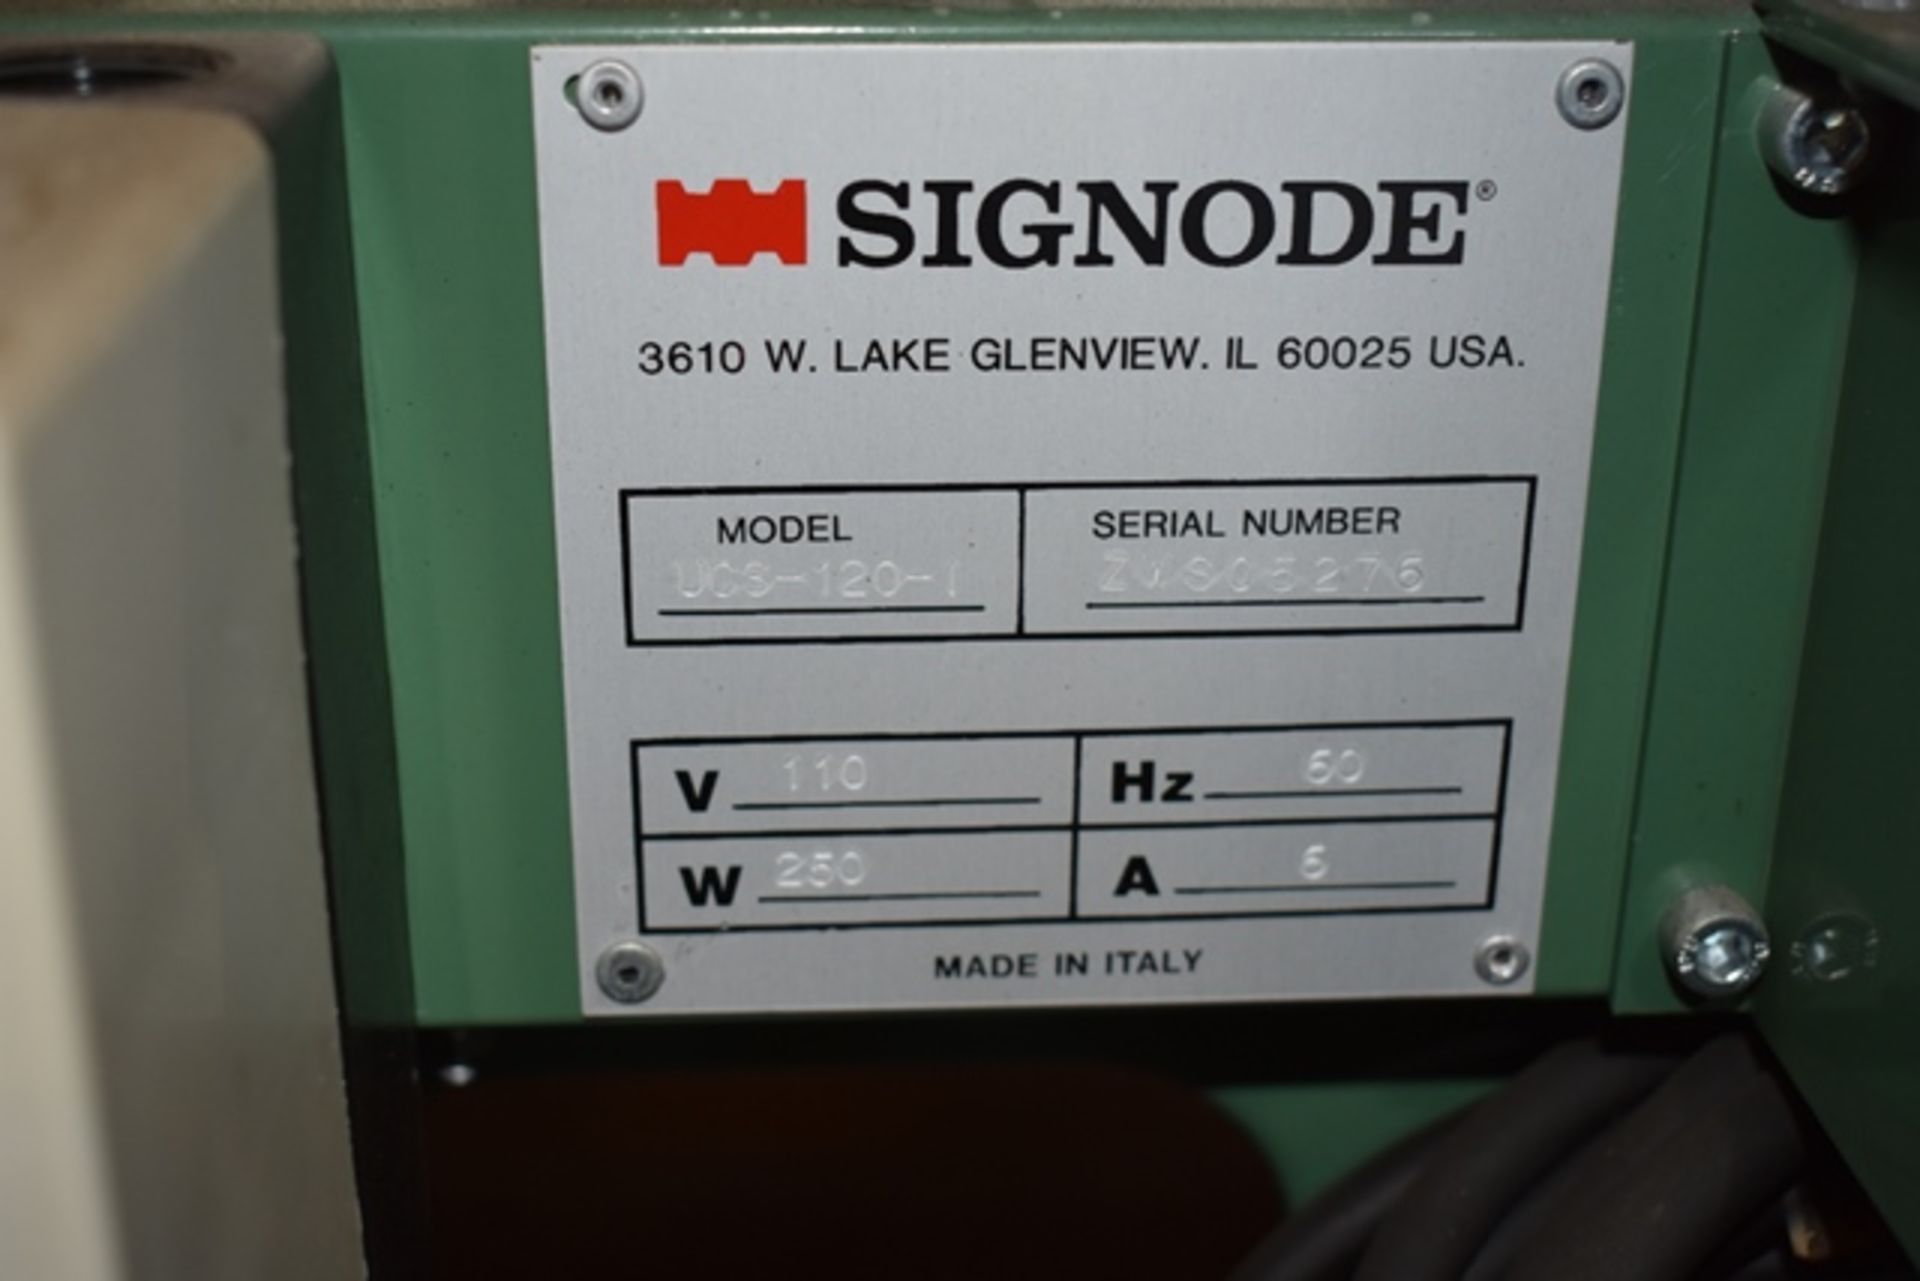 Signode case taper, model USC-120-1, s/n 2WS05276, never installed, no tape head - Image 2 of 2